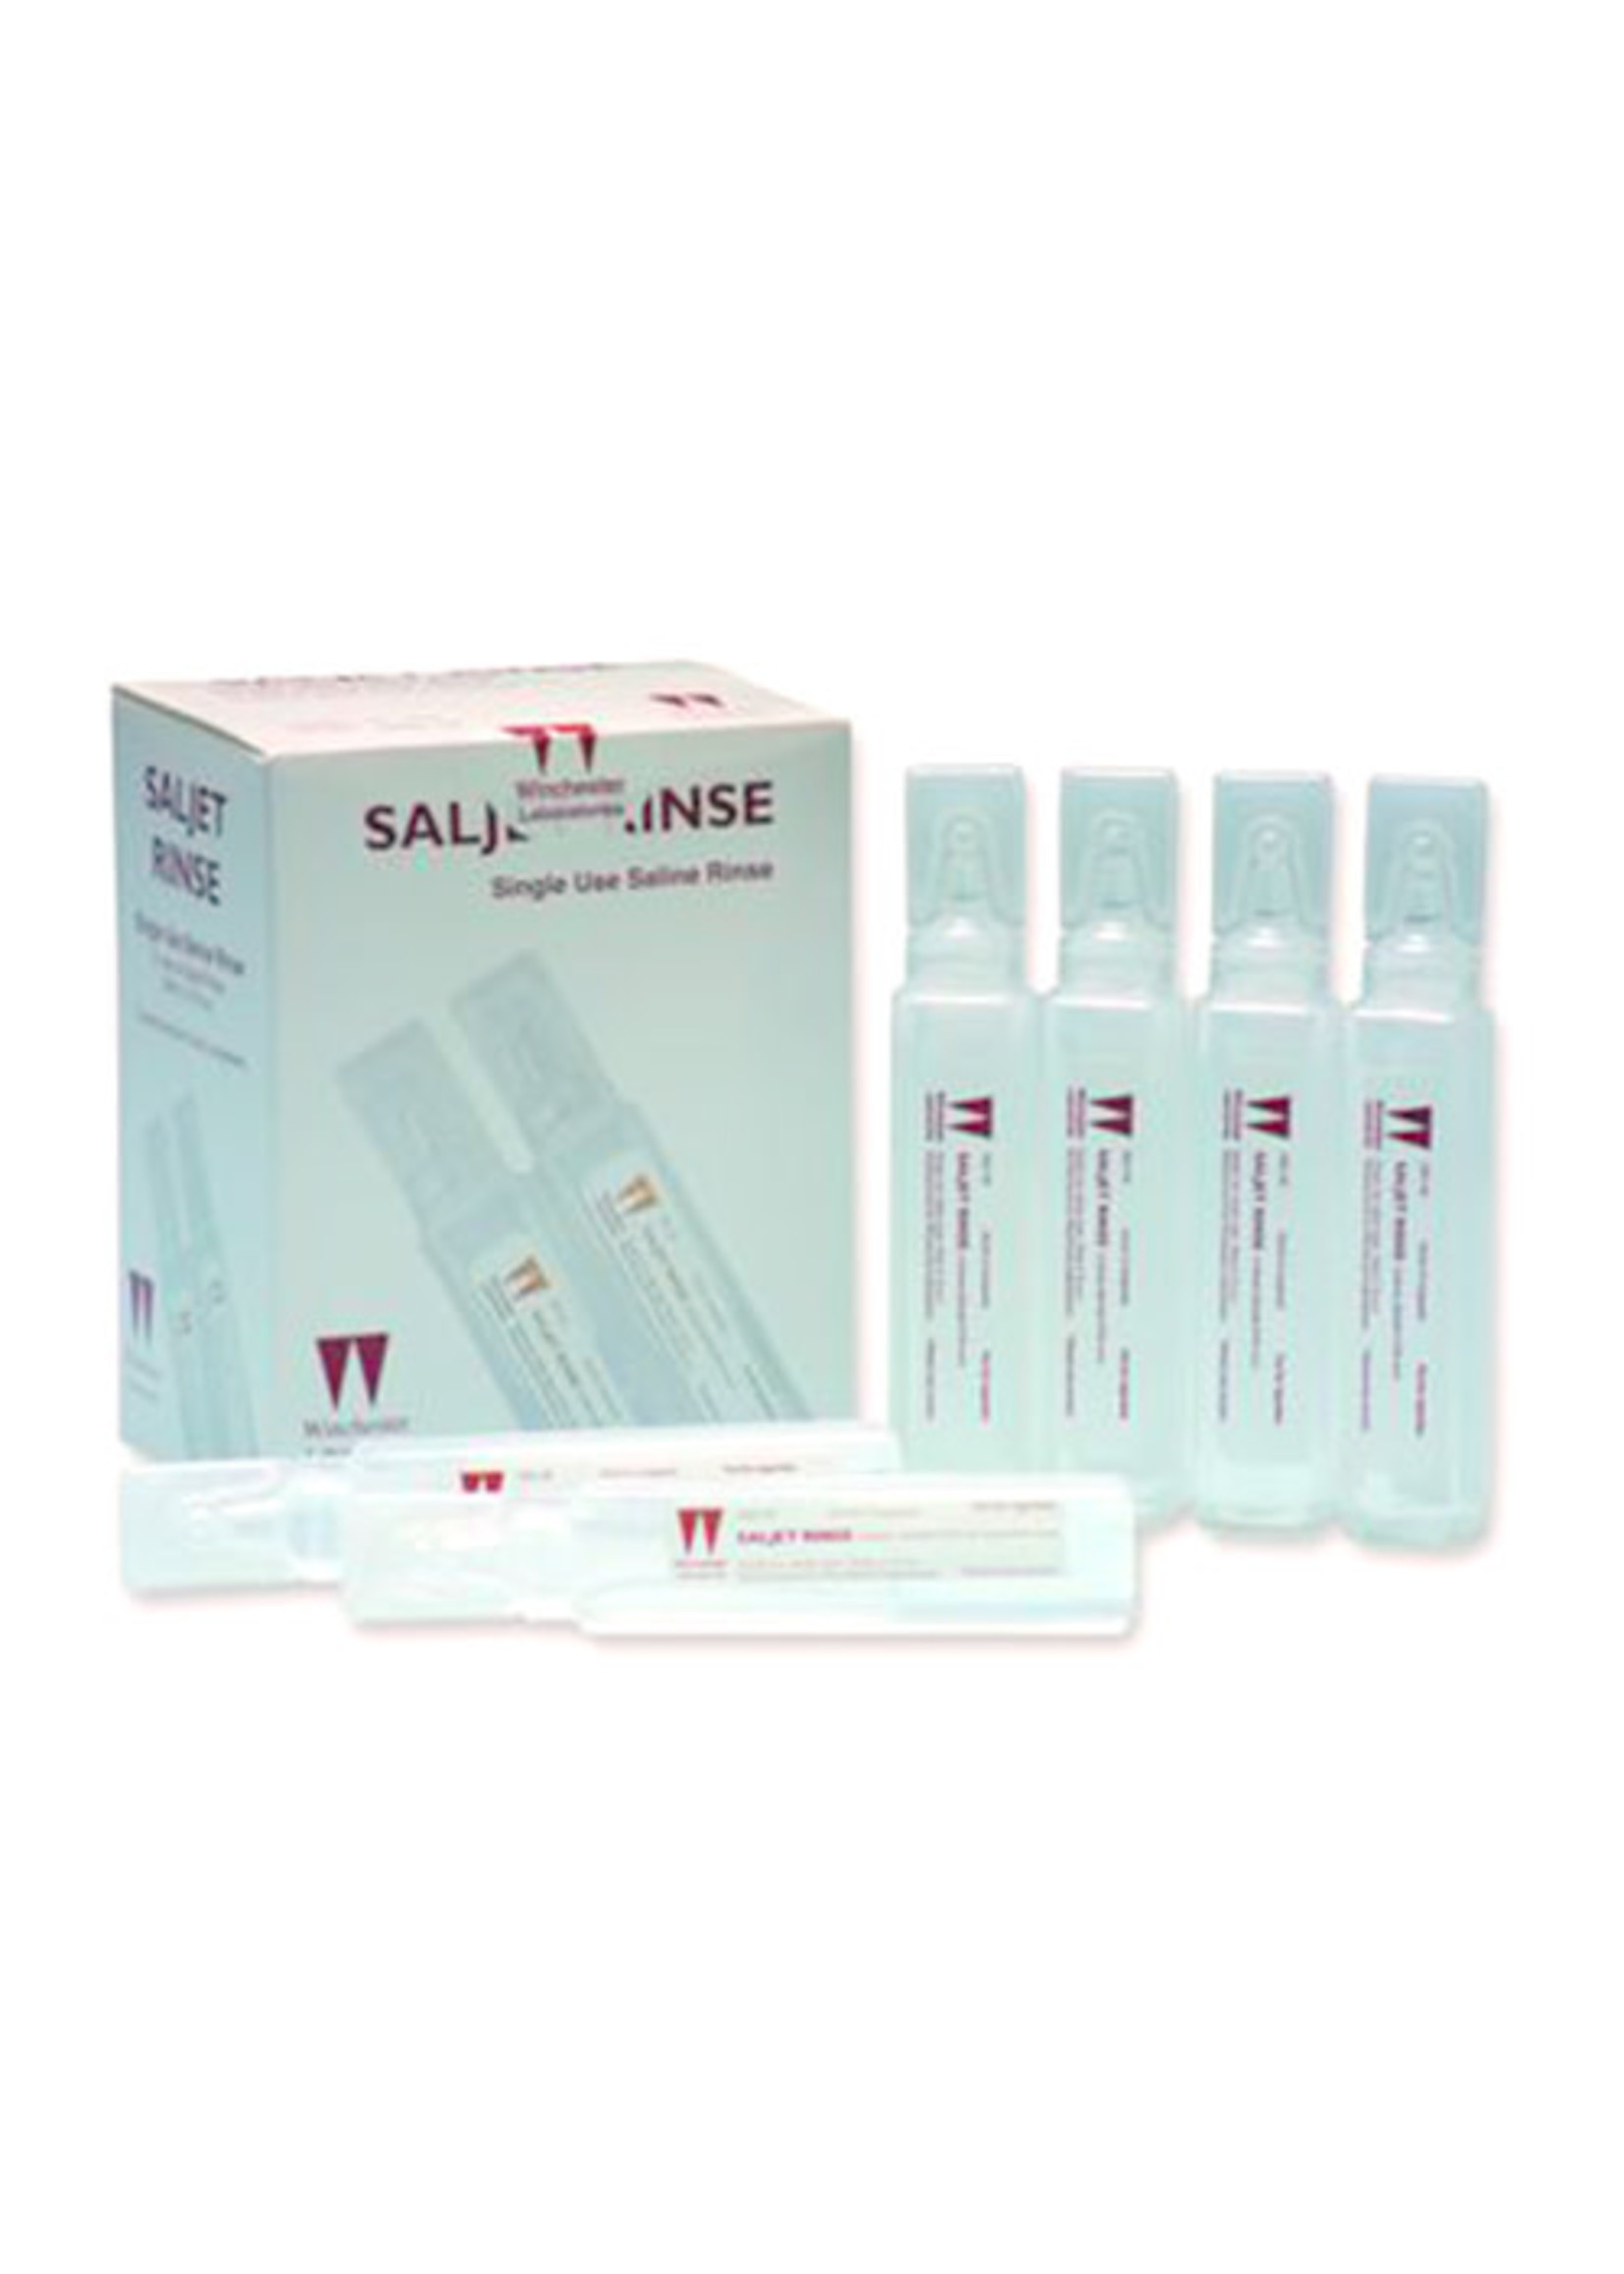 Cleansing Solution 0.9% Saline 30mL 12/Bx